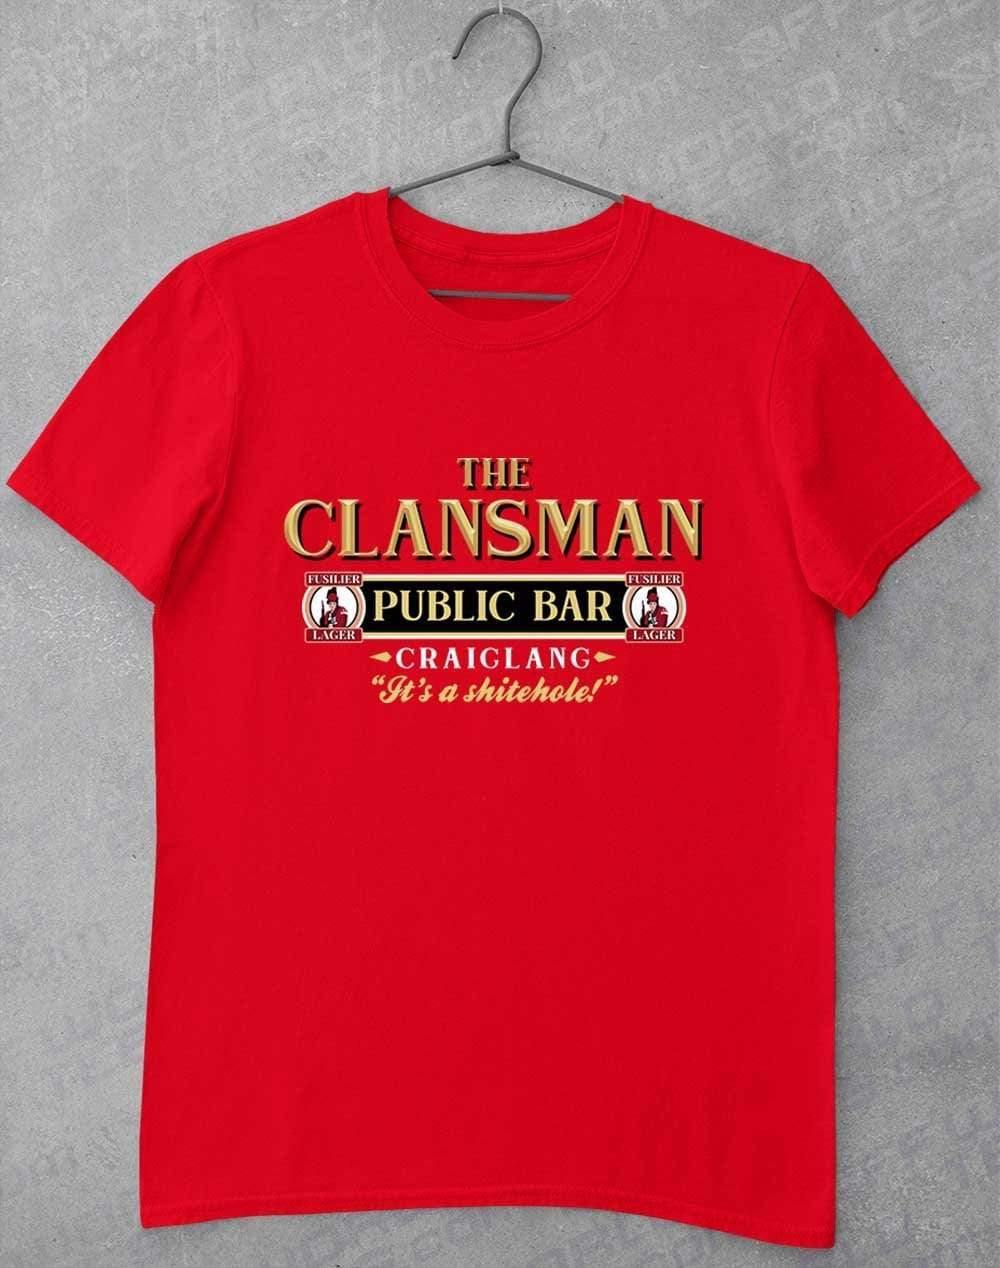 The Clansman Craiglang T-Shirt S / Red  - Off World Tees